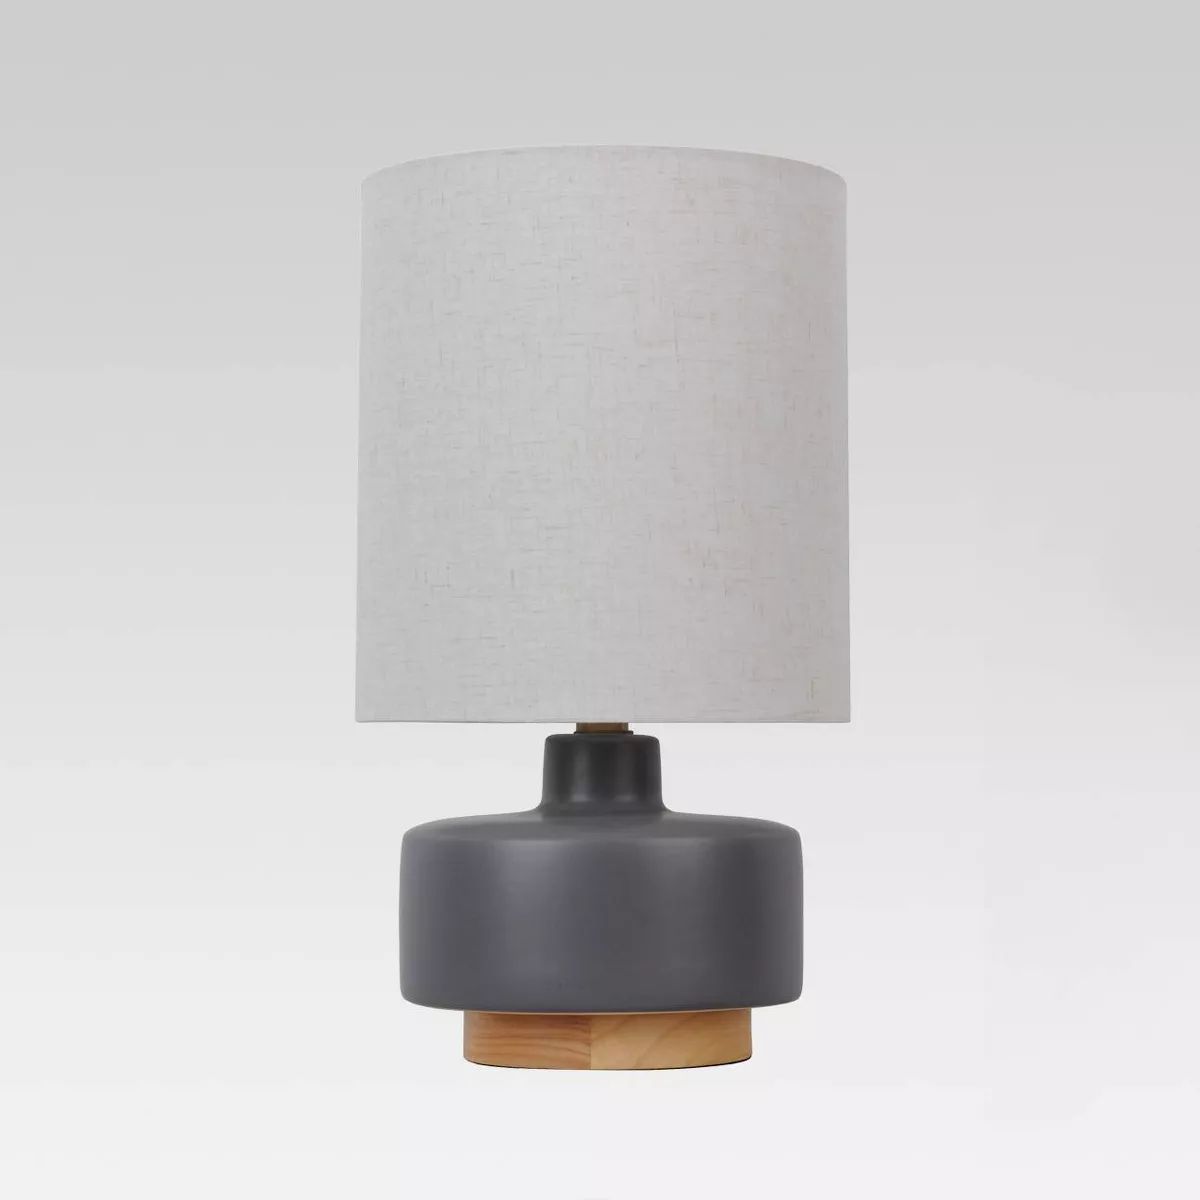 Ceramic Table Lamp with Wood Base - Threshold™ | Target